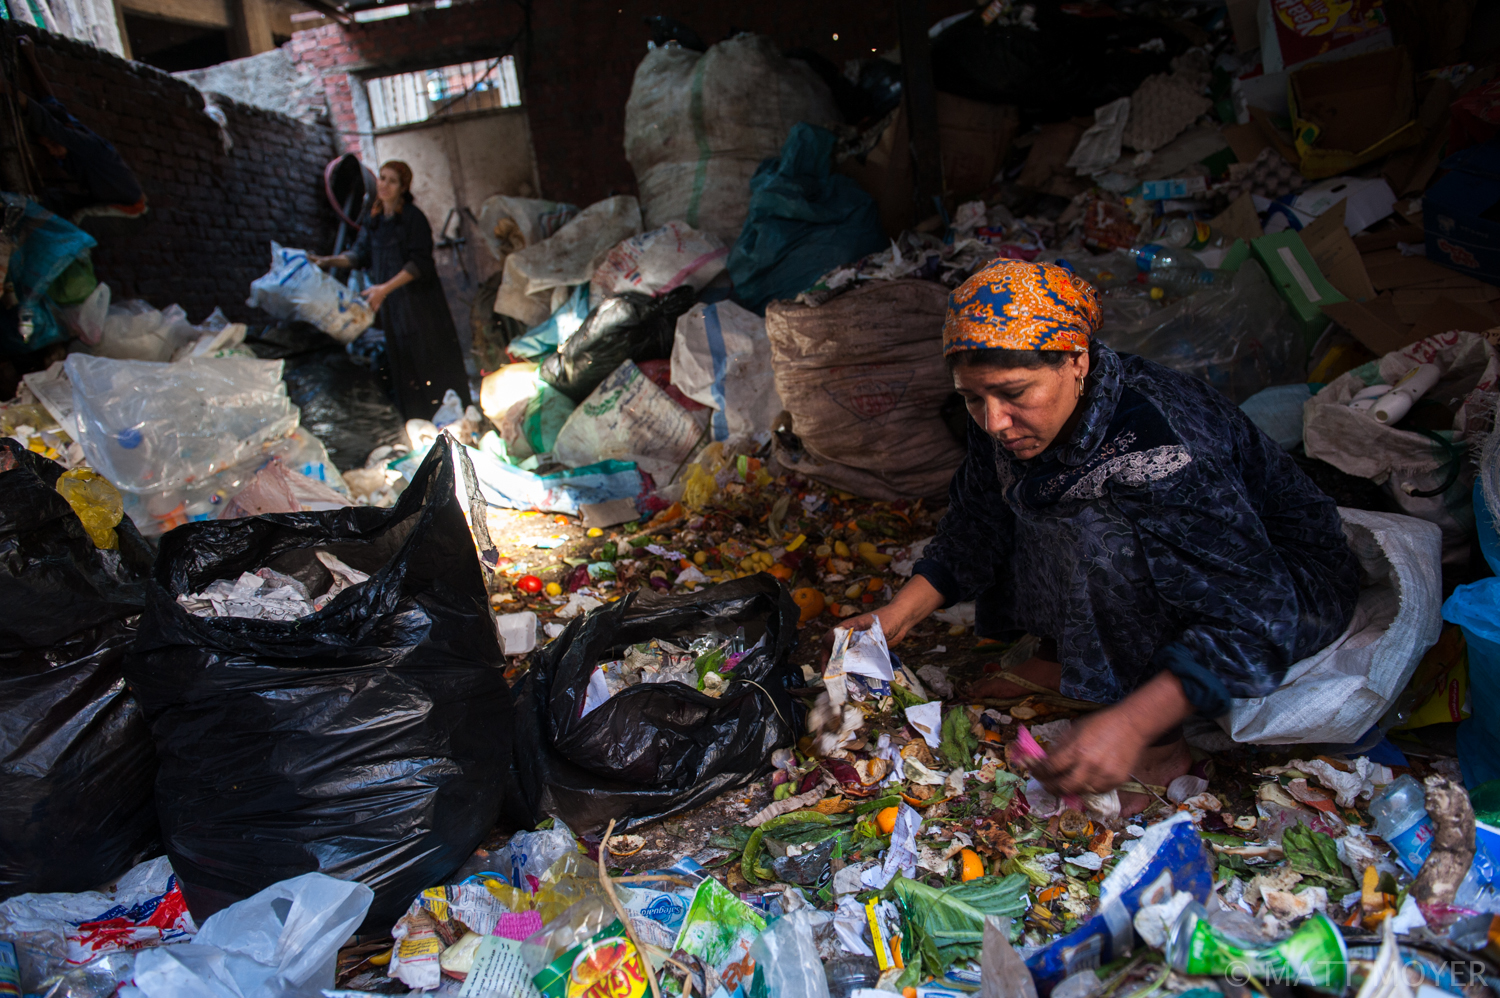  A woman sorts through trash in a Christian part of Cairo, Egypt. 